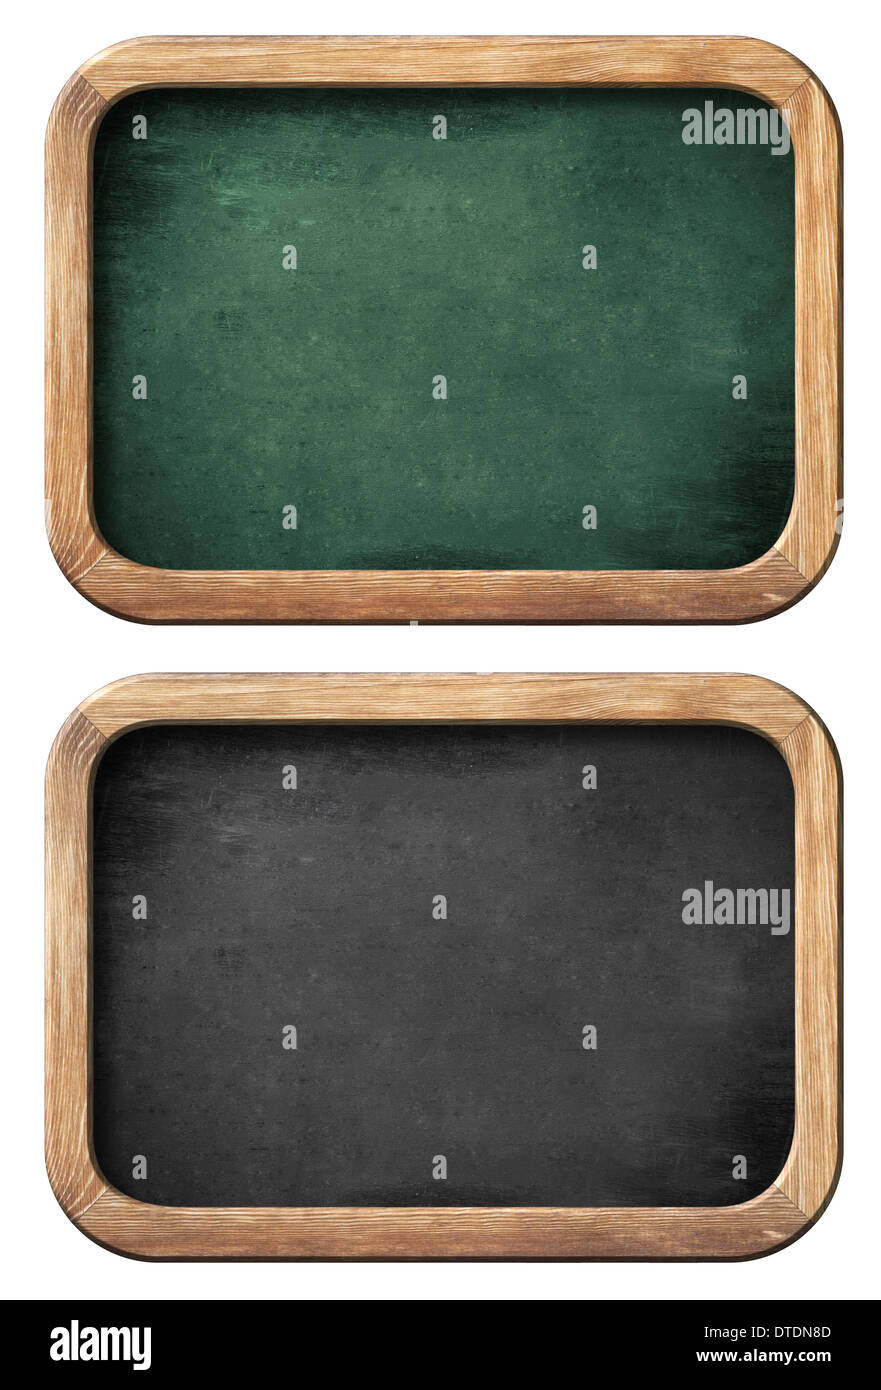 chalkboards or blackboards set isolated on white with clipping path included Stock Photo